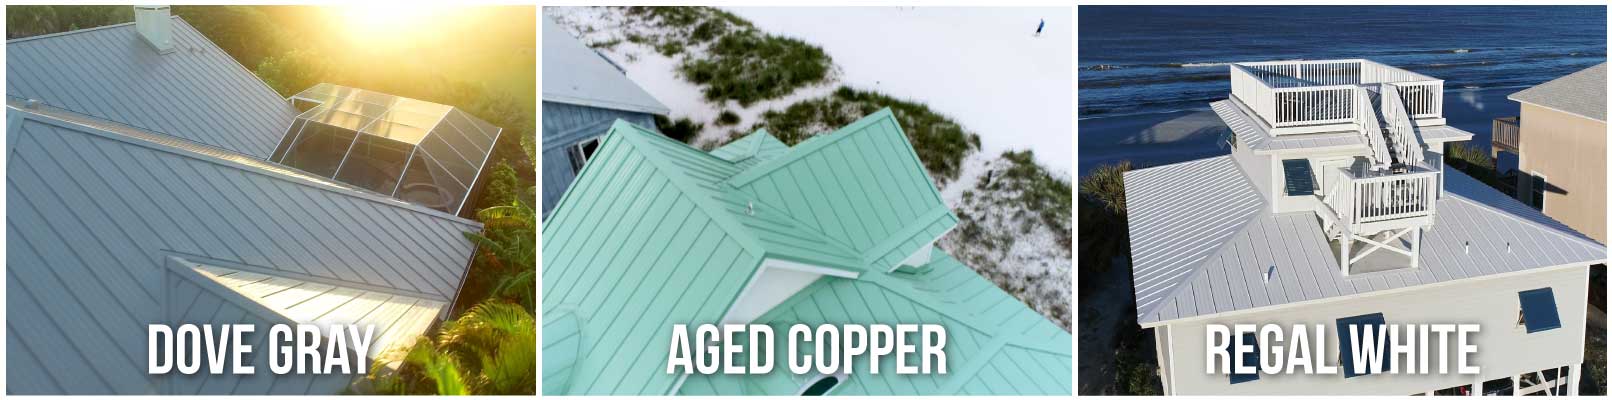 Tri County Metals colored roofing